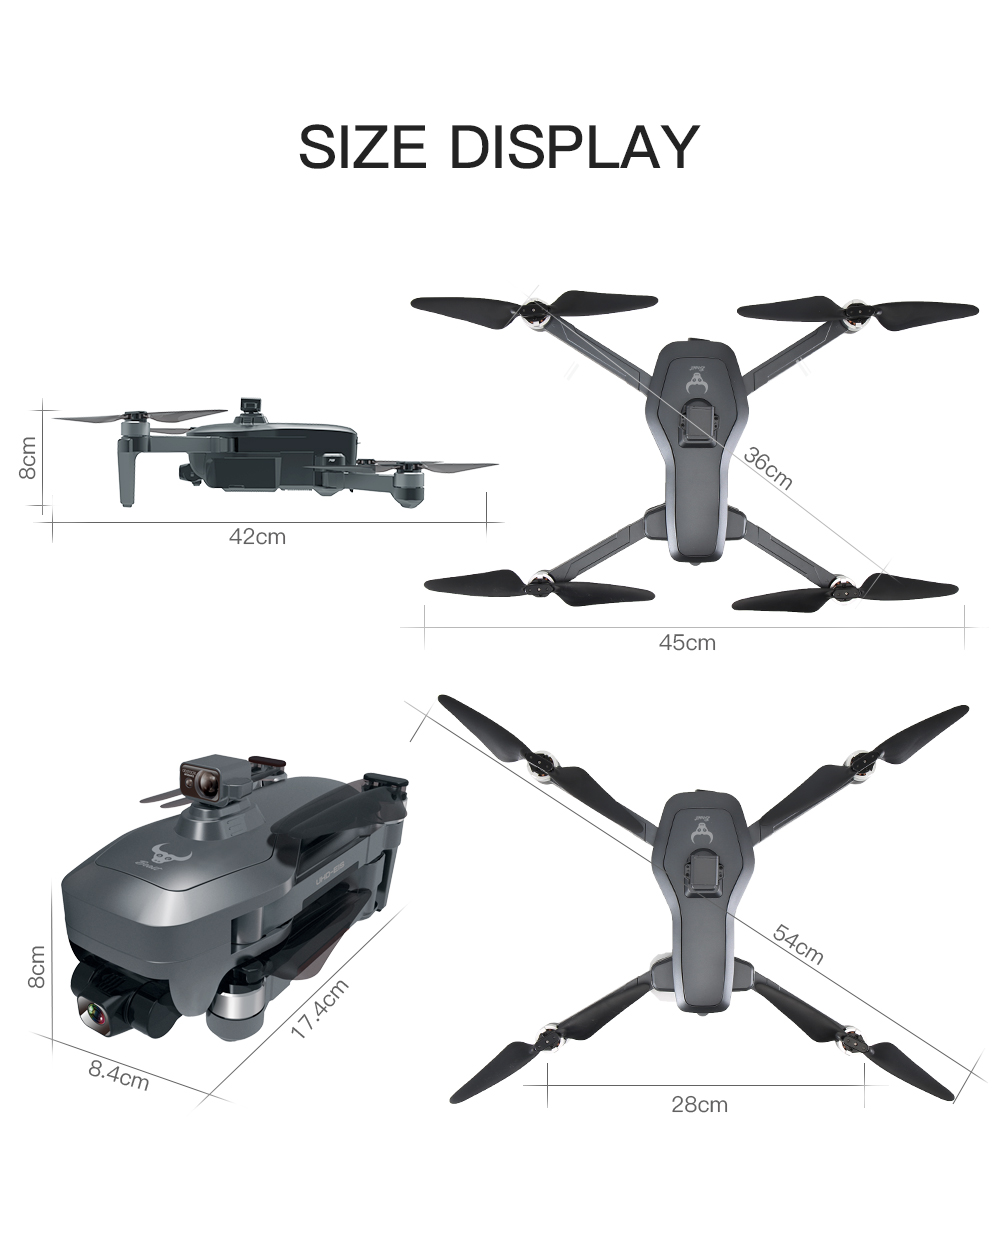 ZLL SG906 MAX GPS 5G WIFI FPV With 4K HD Camera 3-Axis EIS Anti-shake Gimbal Obstacle Avoidance Brushless Foldable RC Drone Quadcopter RTF 107